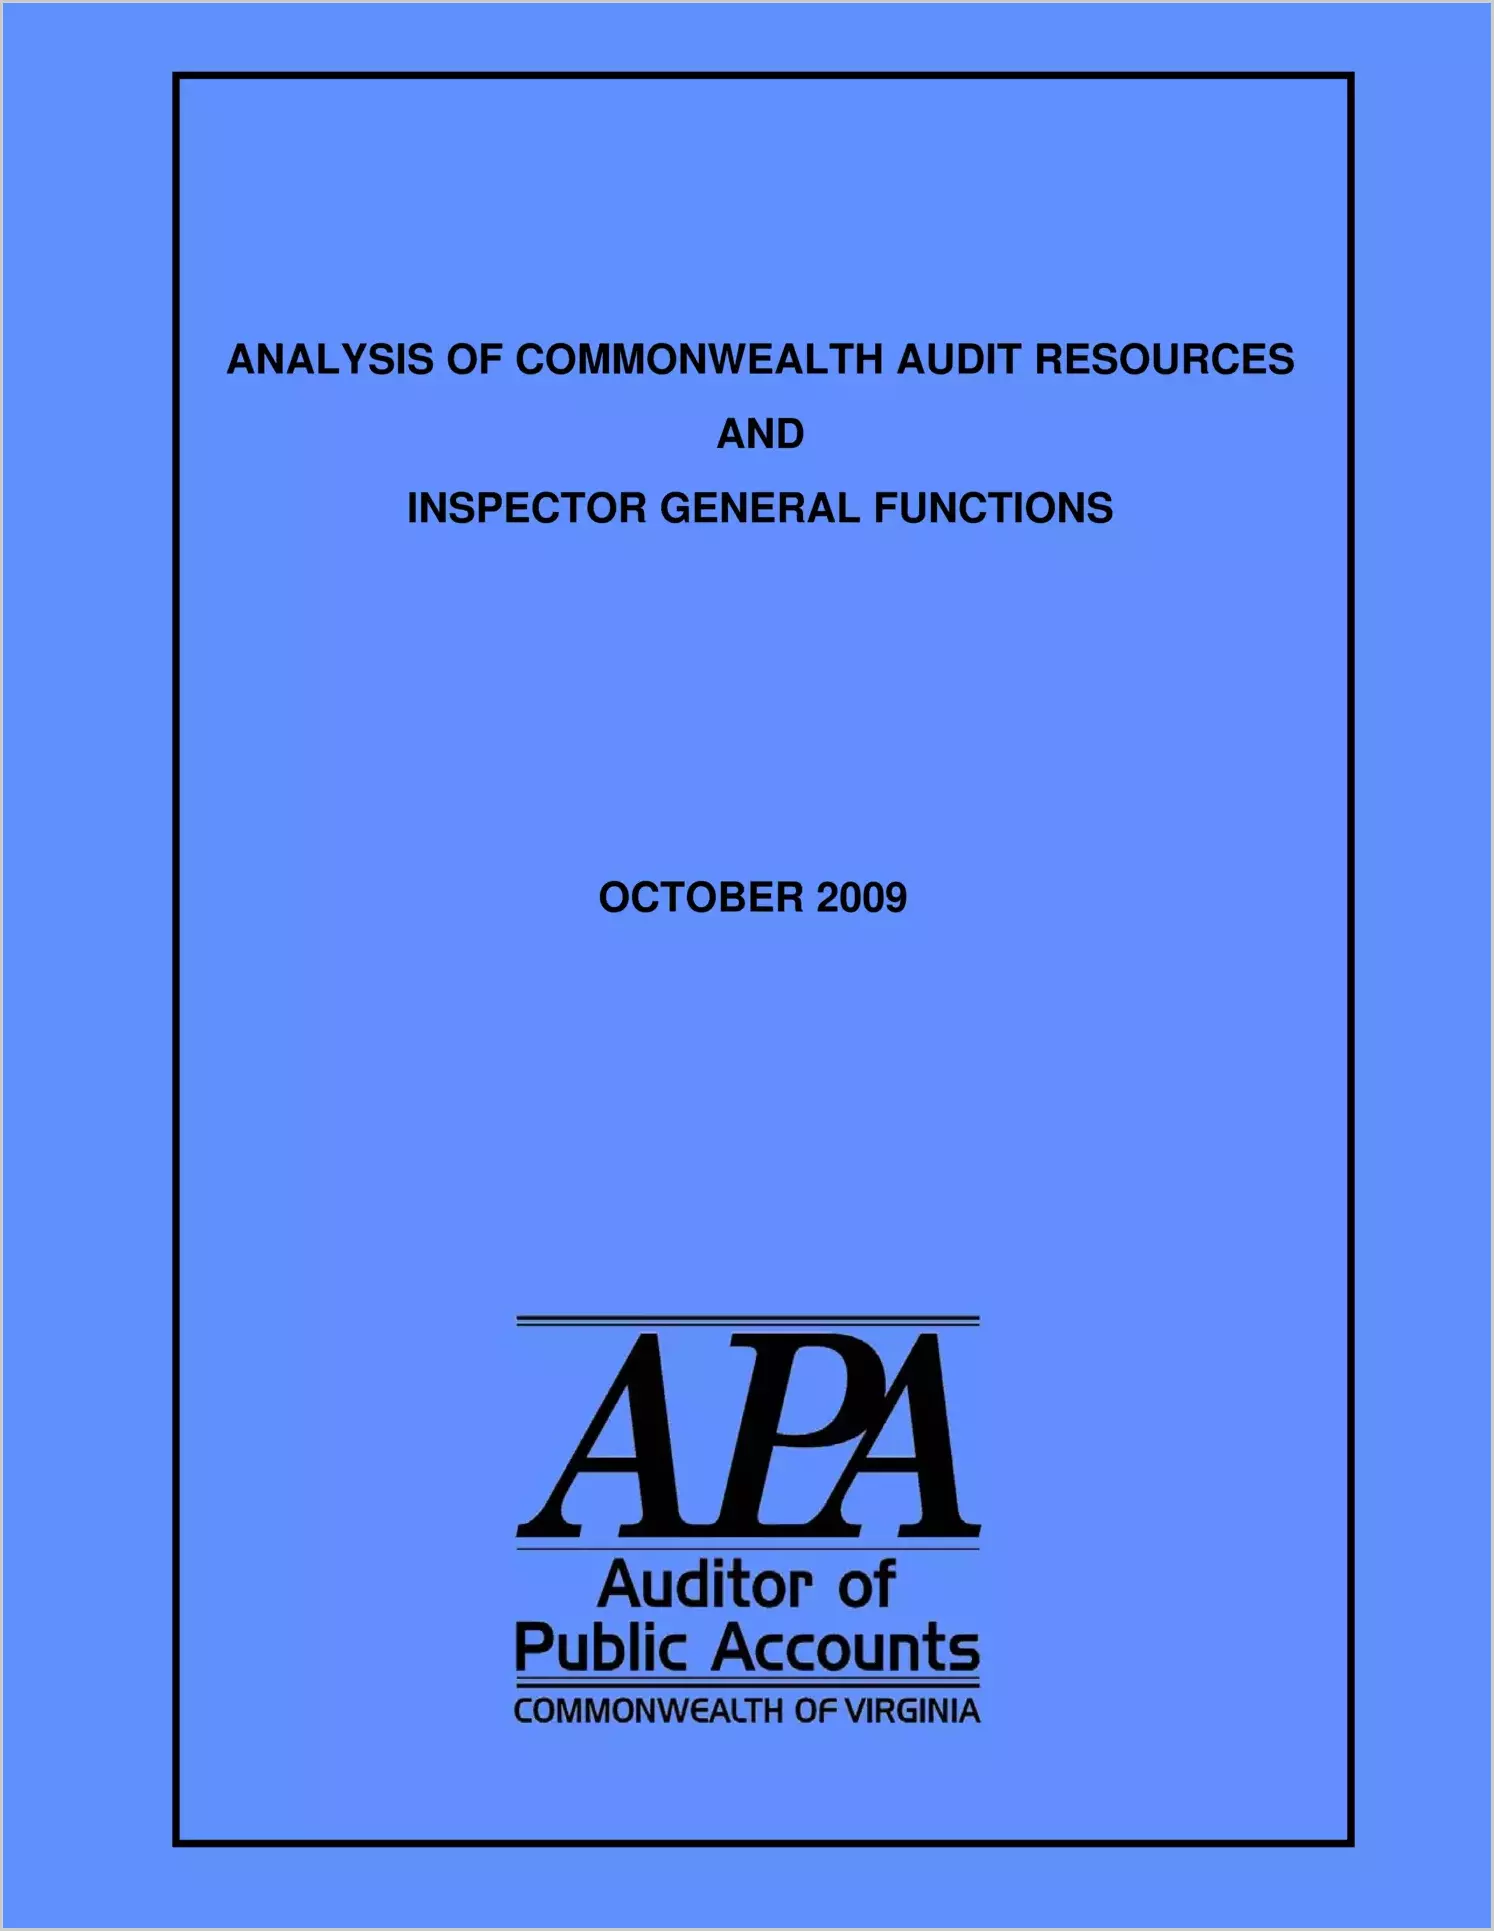 Analysis of Commonwealth Audit Resources and Inspector General Functions as of October 2009